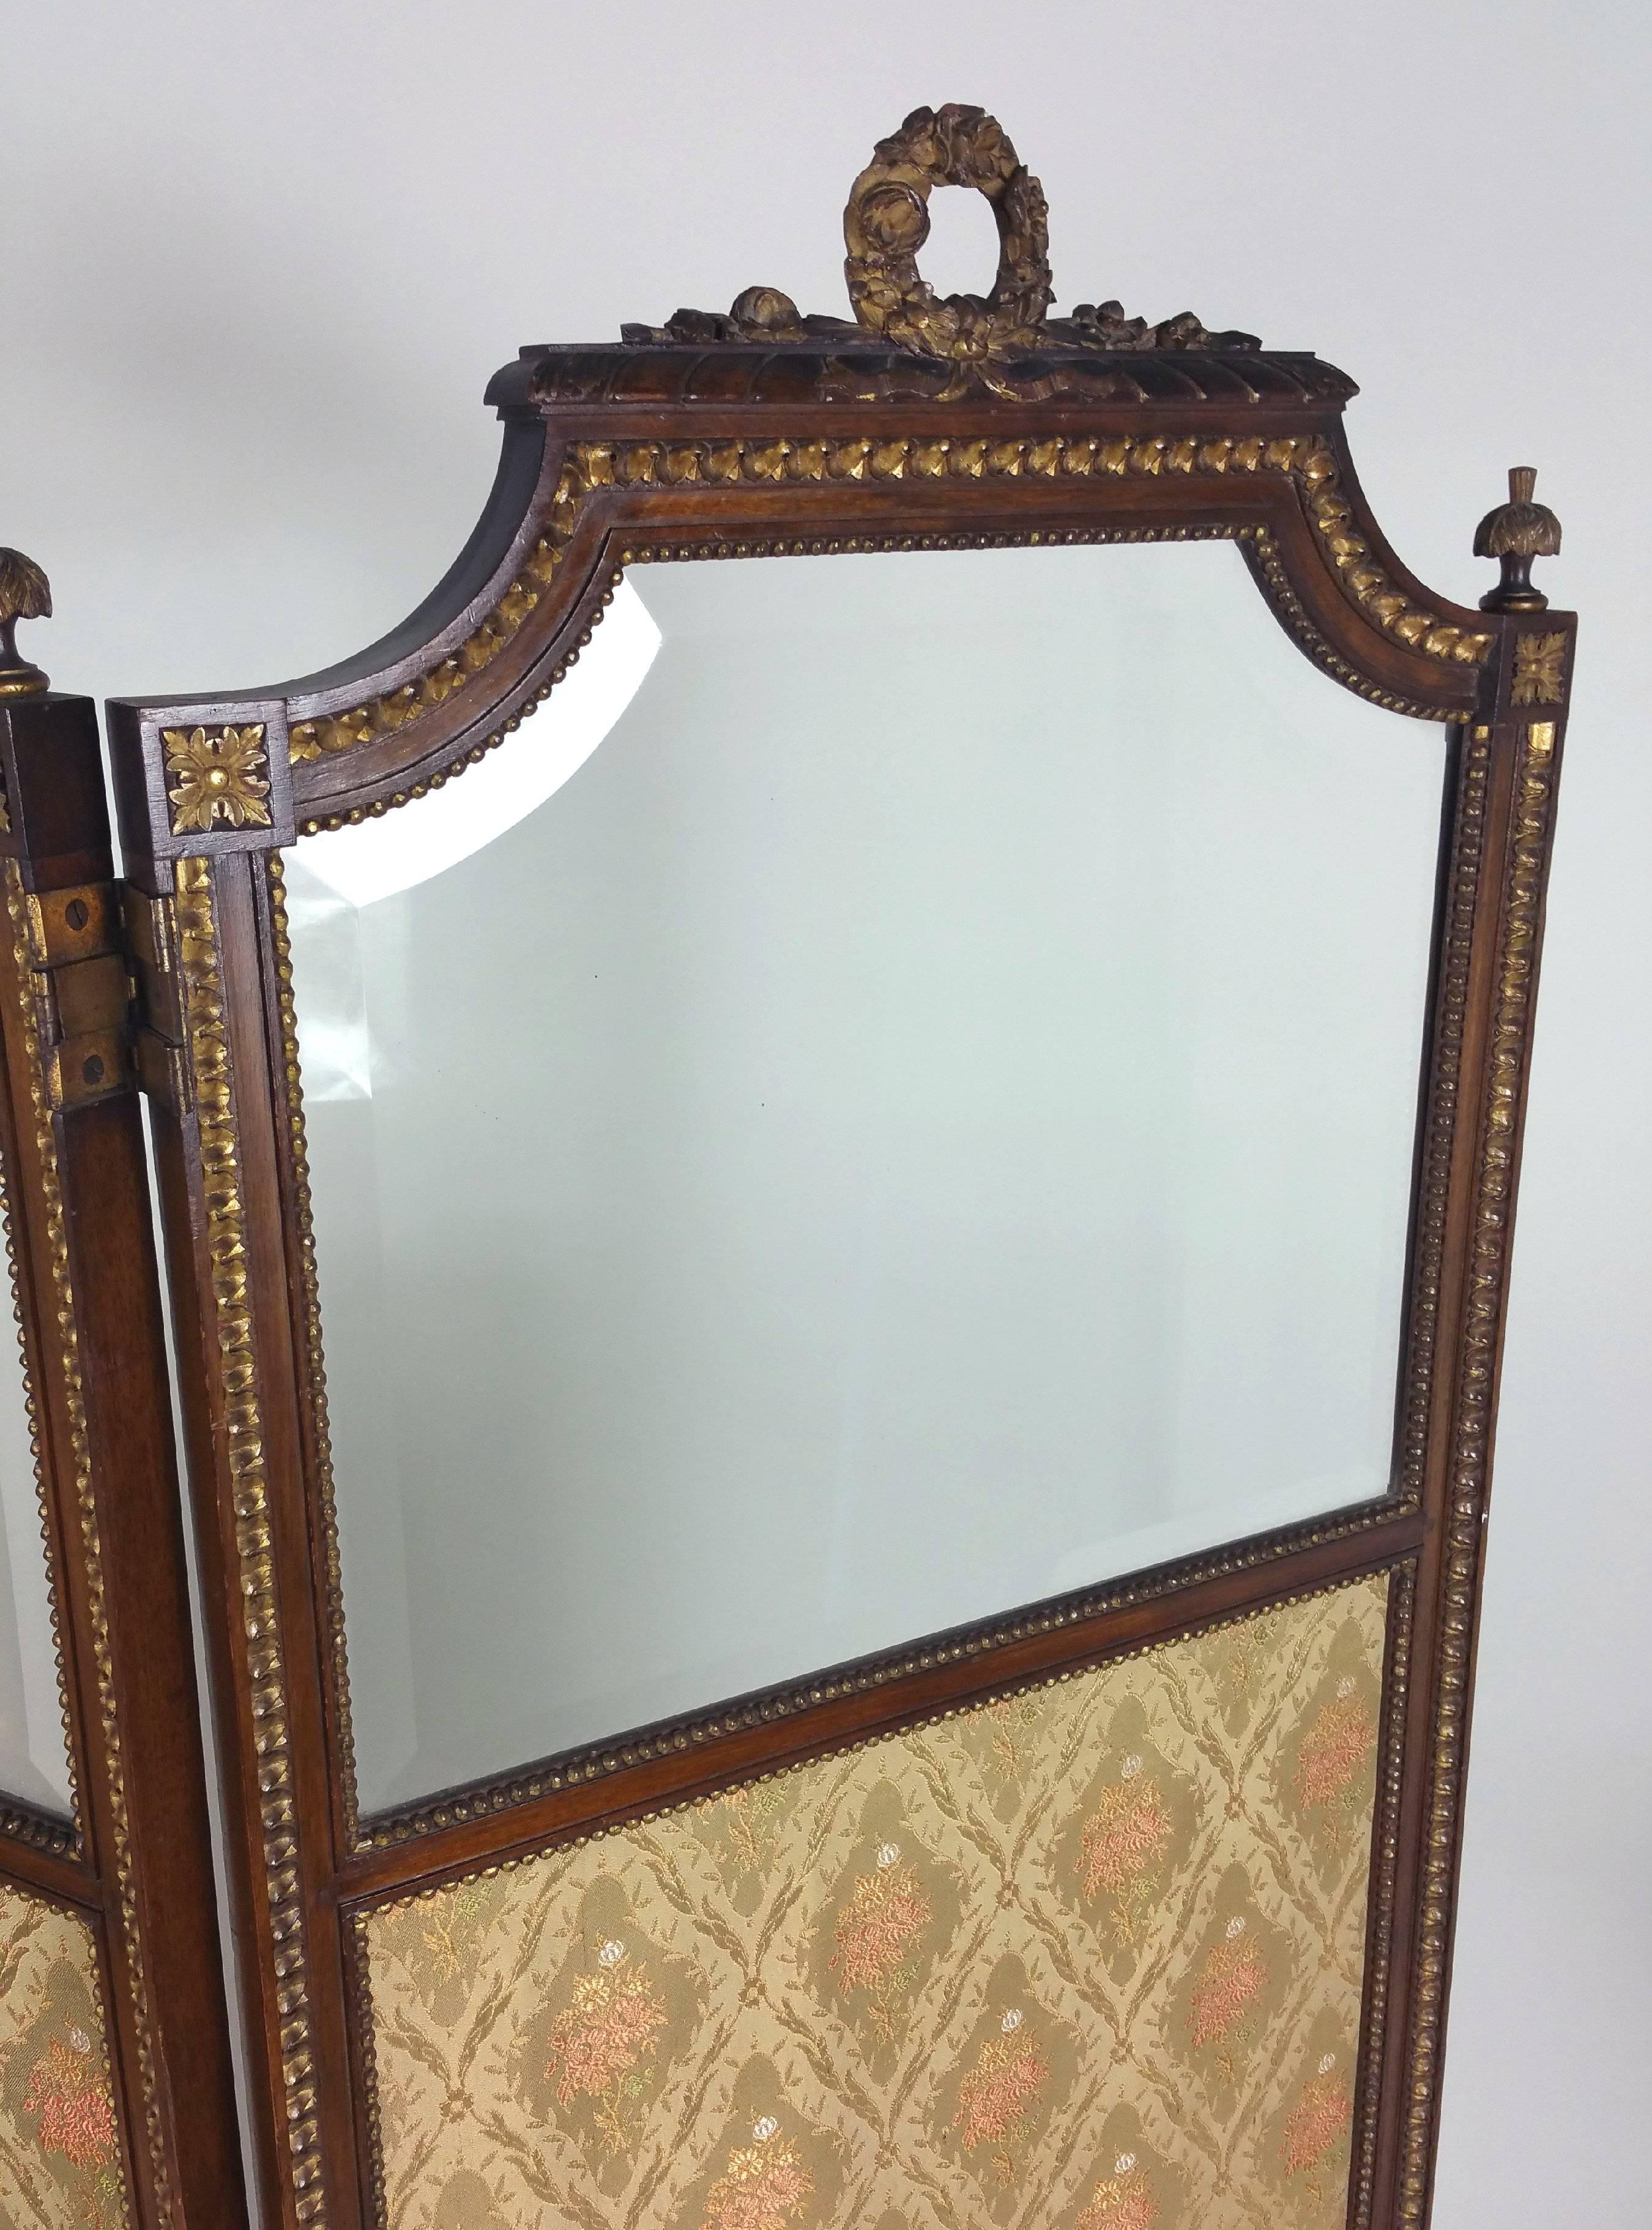 This lovely and delicately designed French carved walnut and gilt three-fold screen is circa 1890 and features the original bevelled glass panels on the top. Each panel has a centrally carved gilt wreath on the top with corner finials and continues